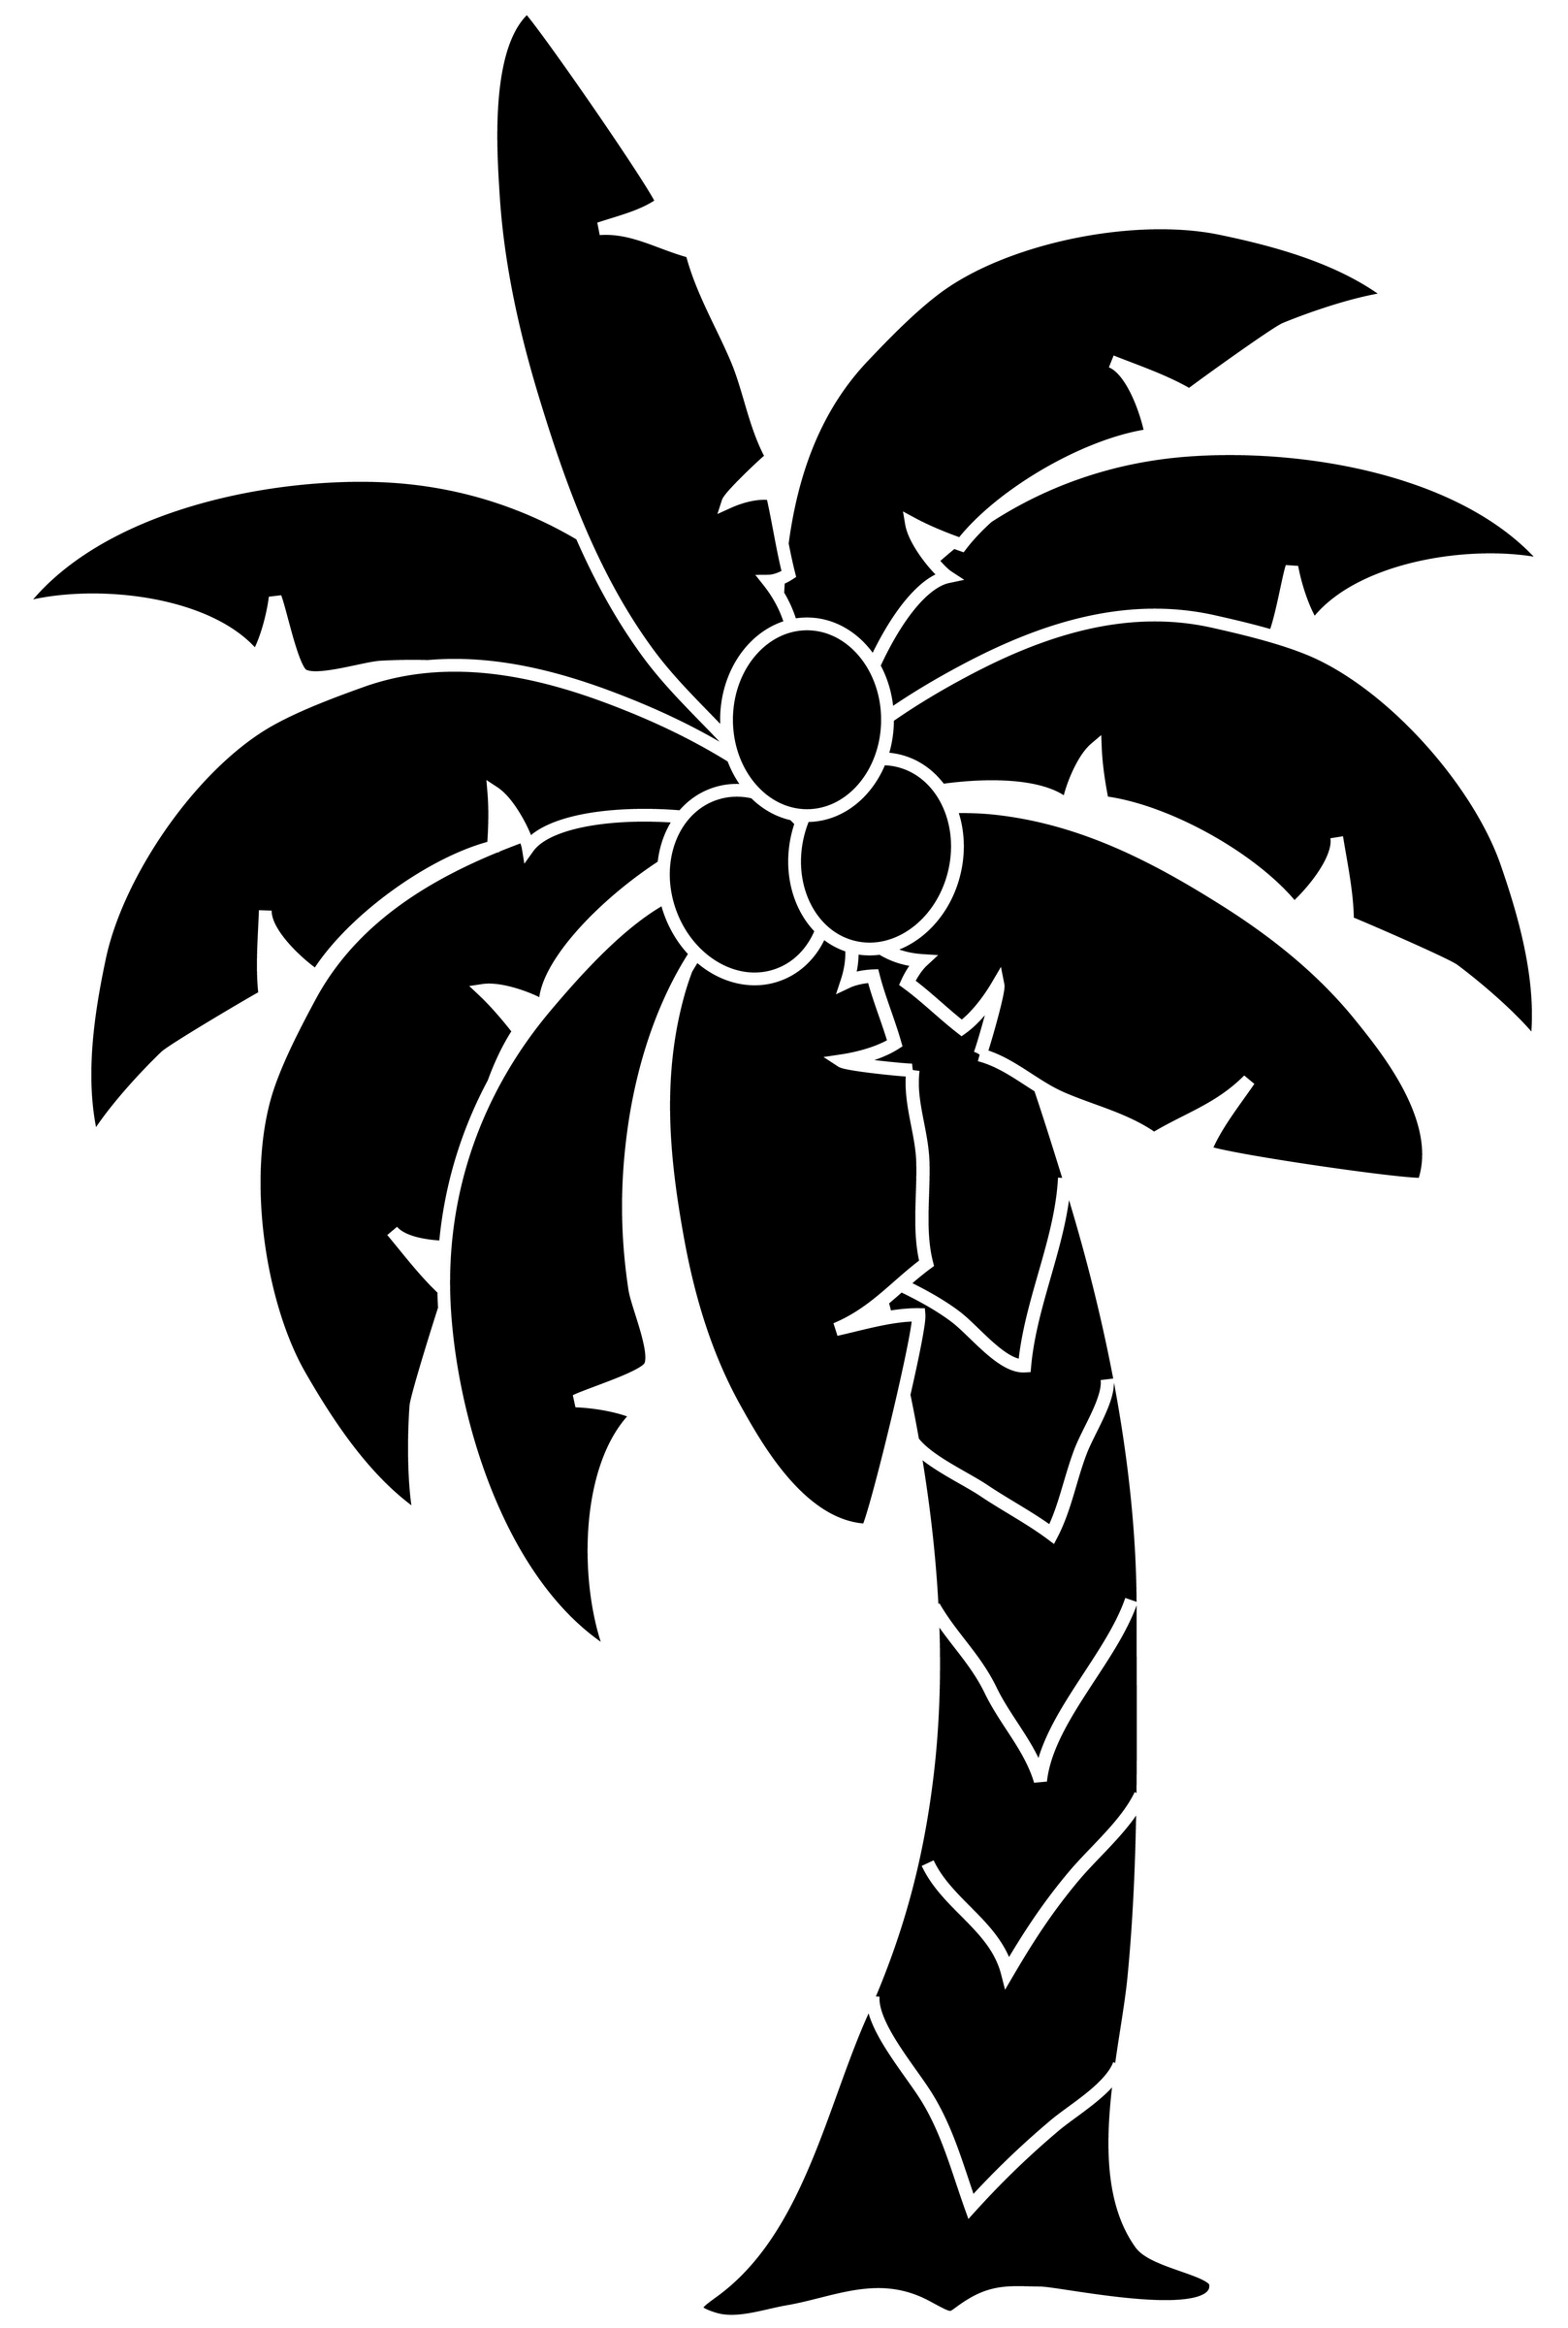 Tropical palm trees clipart free clip art image image